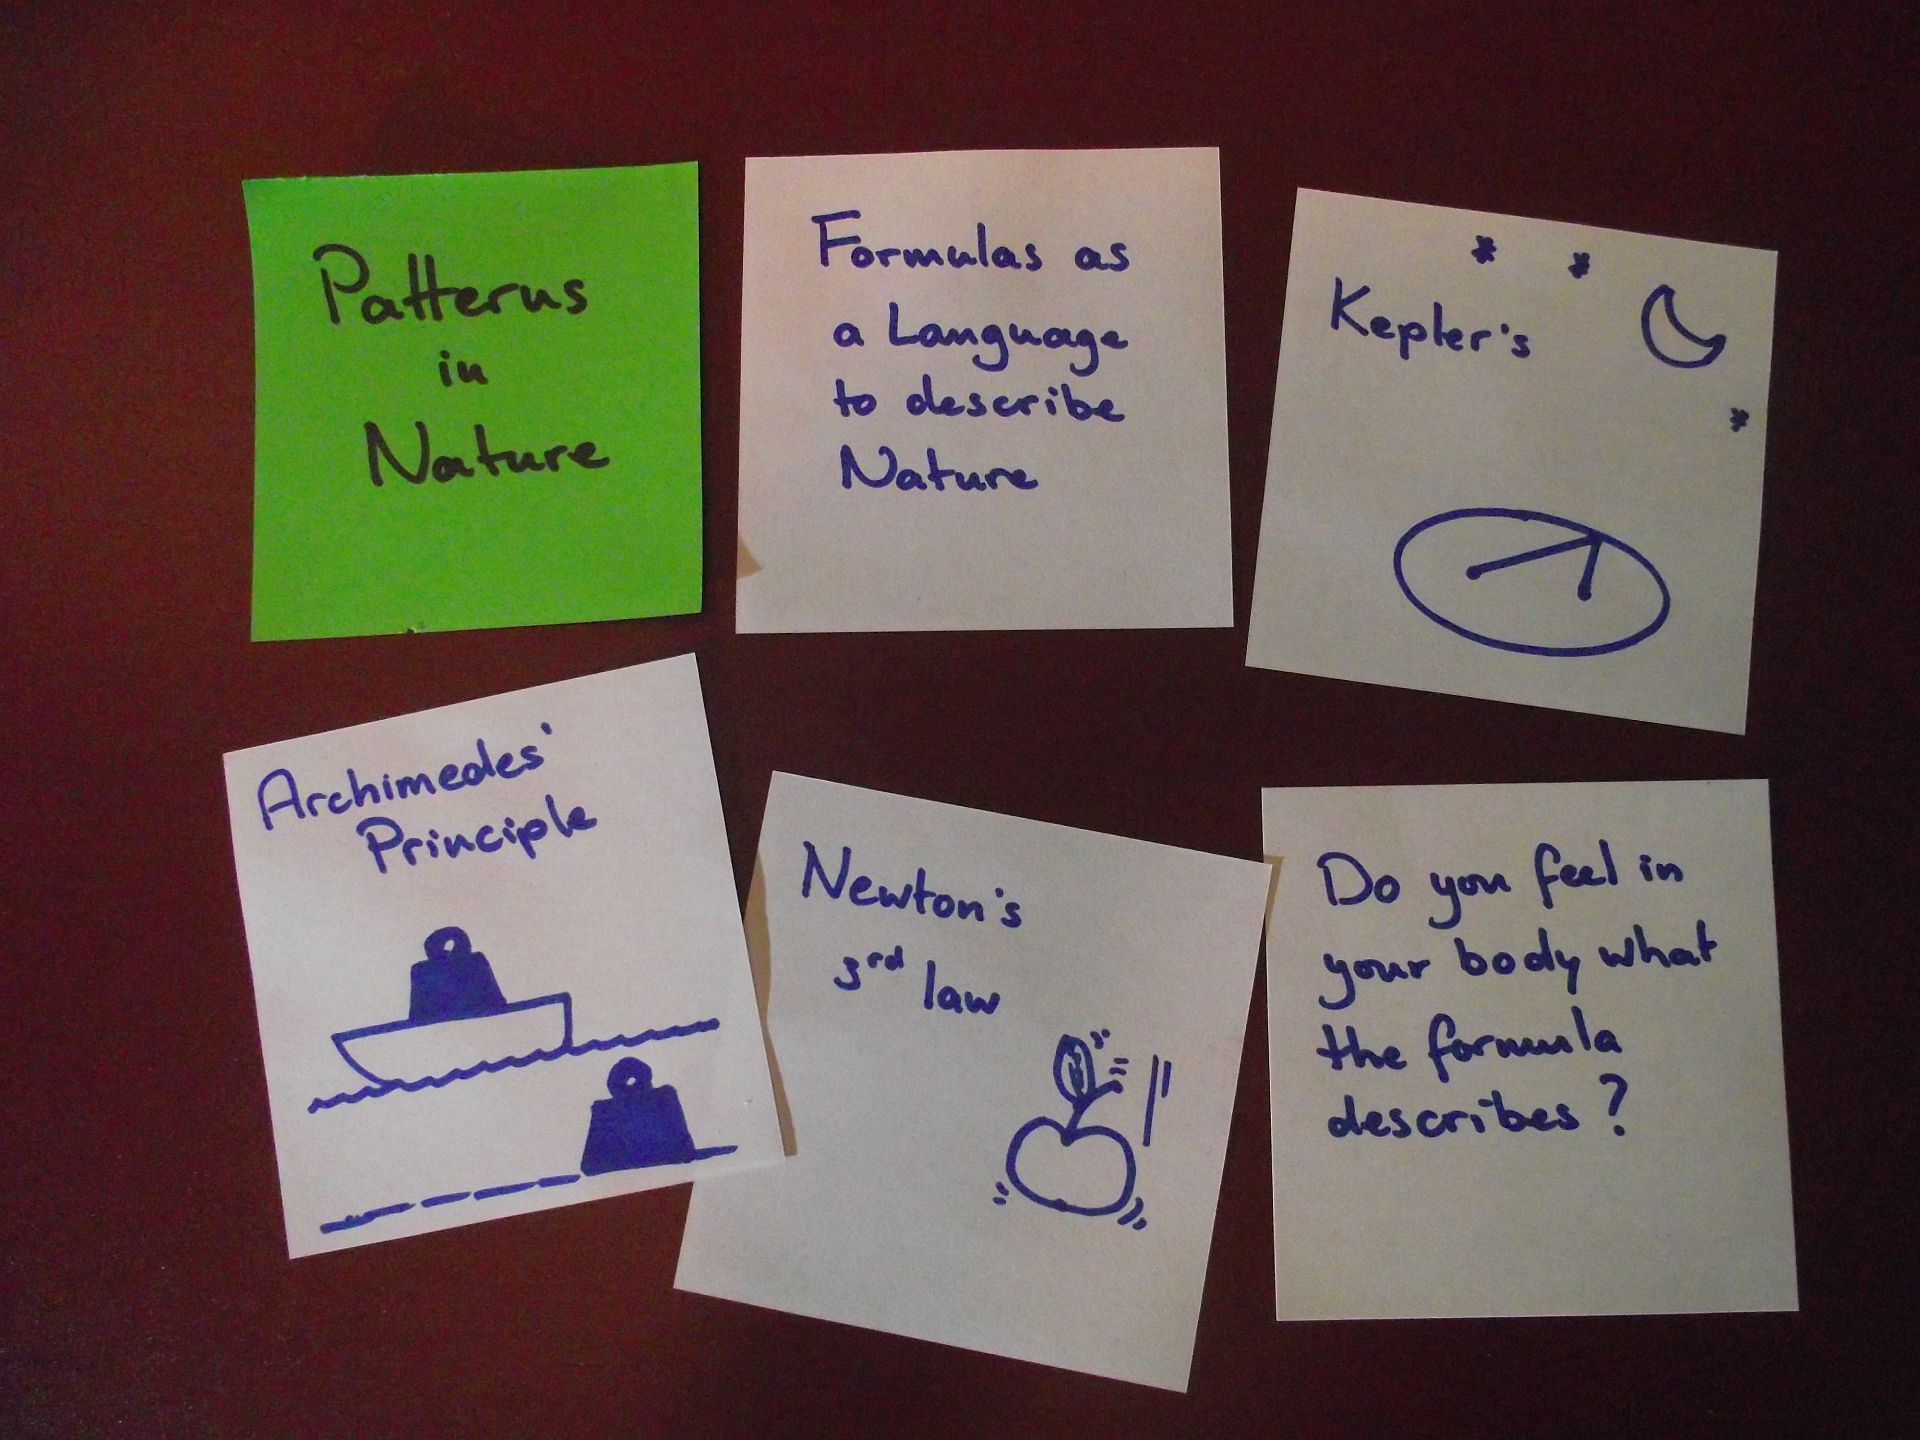 Patterns in Nature - Formulas as a language - by others